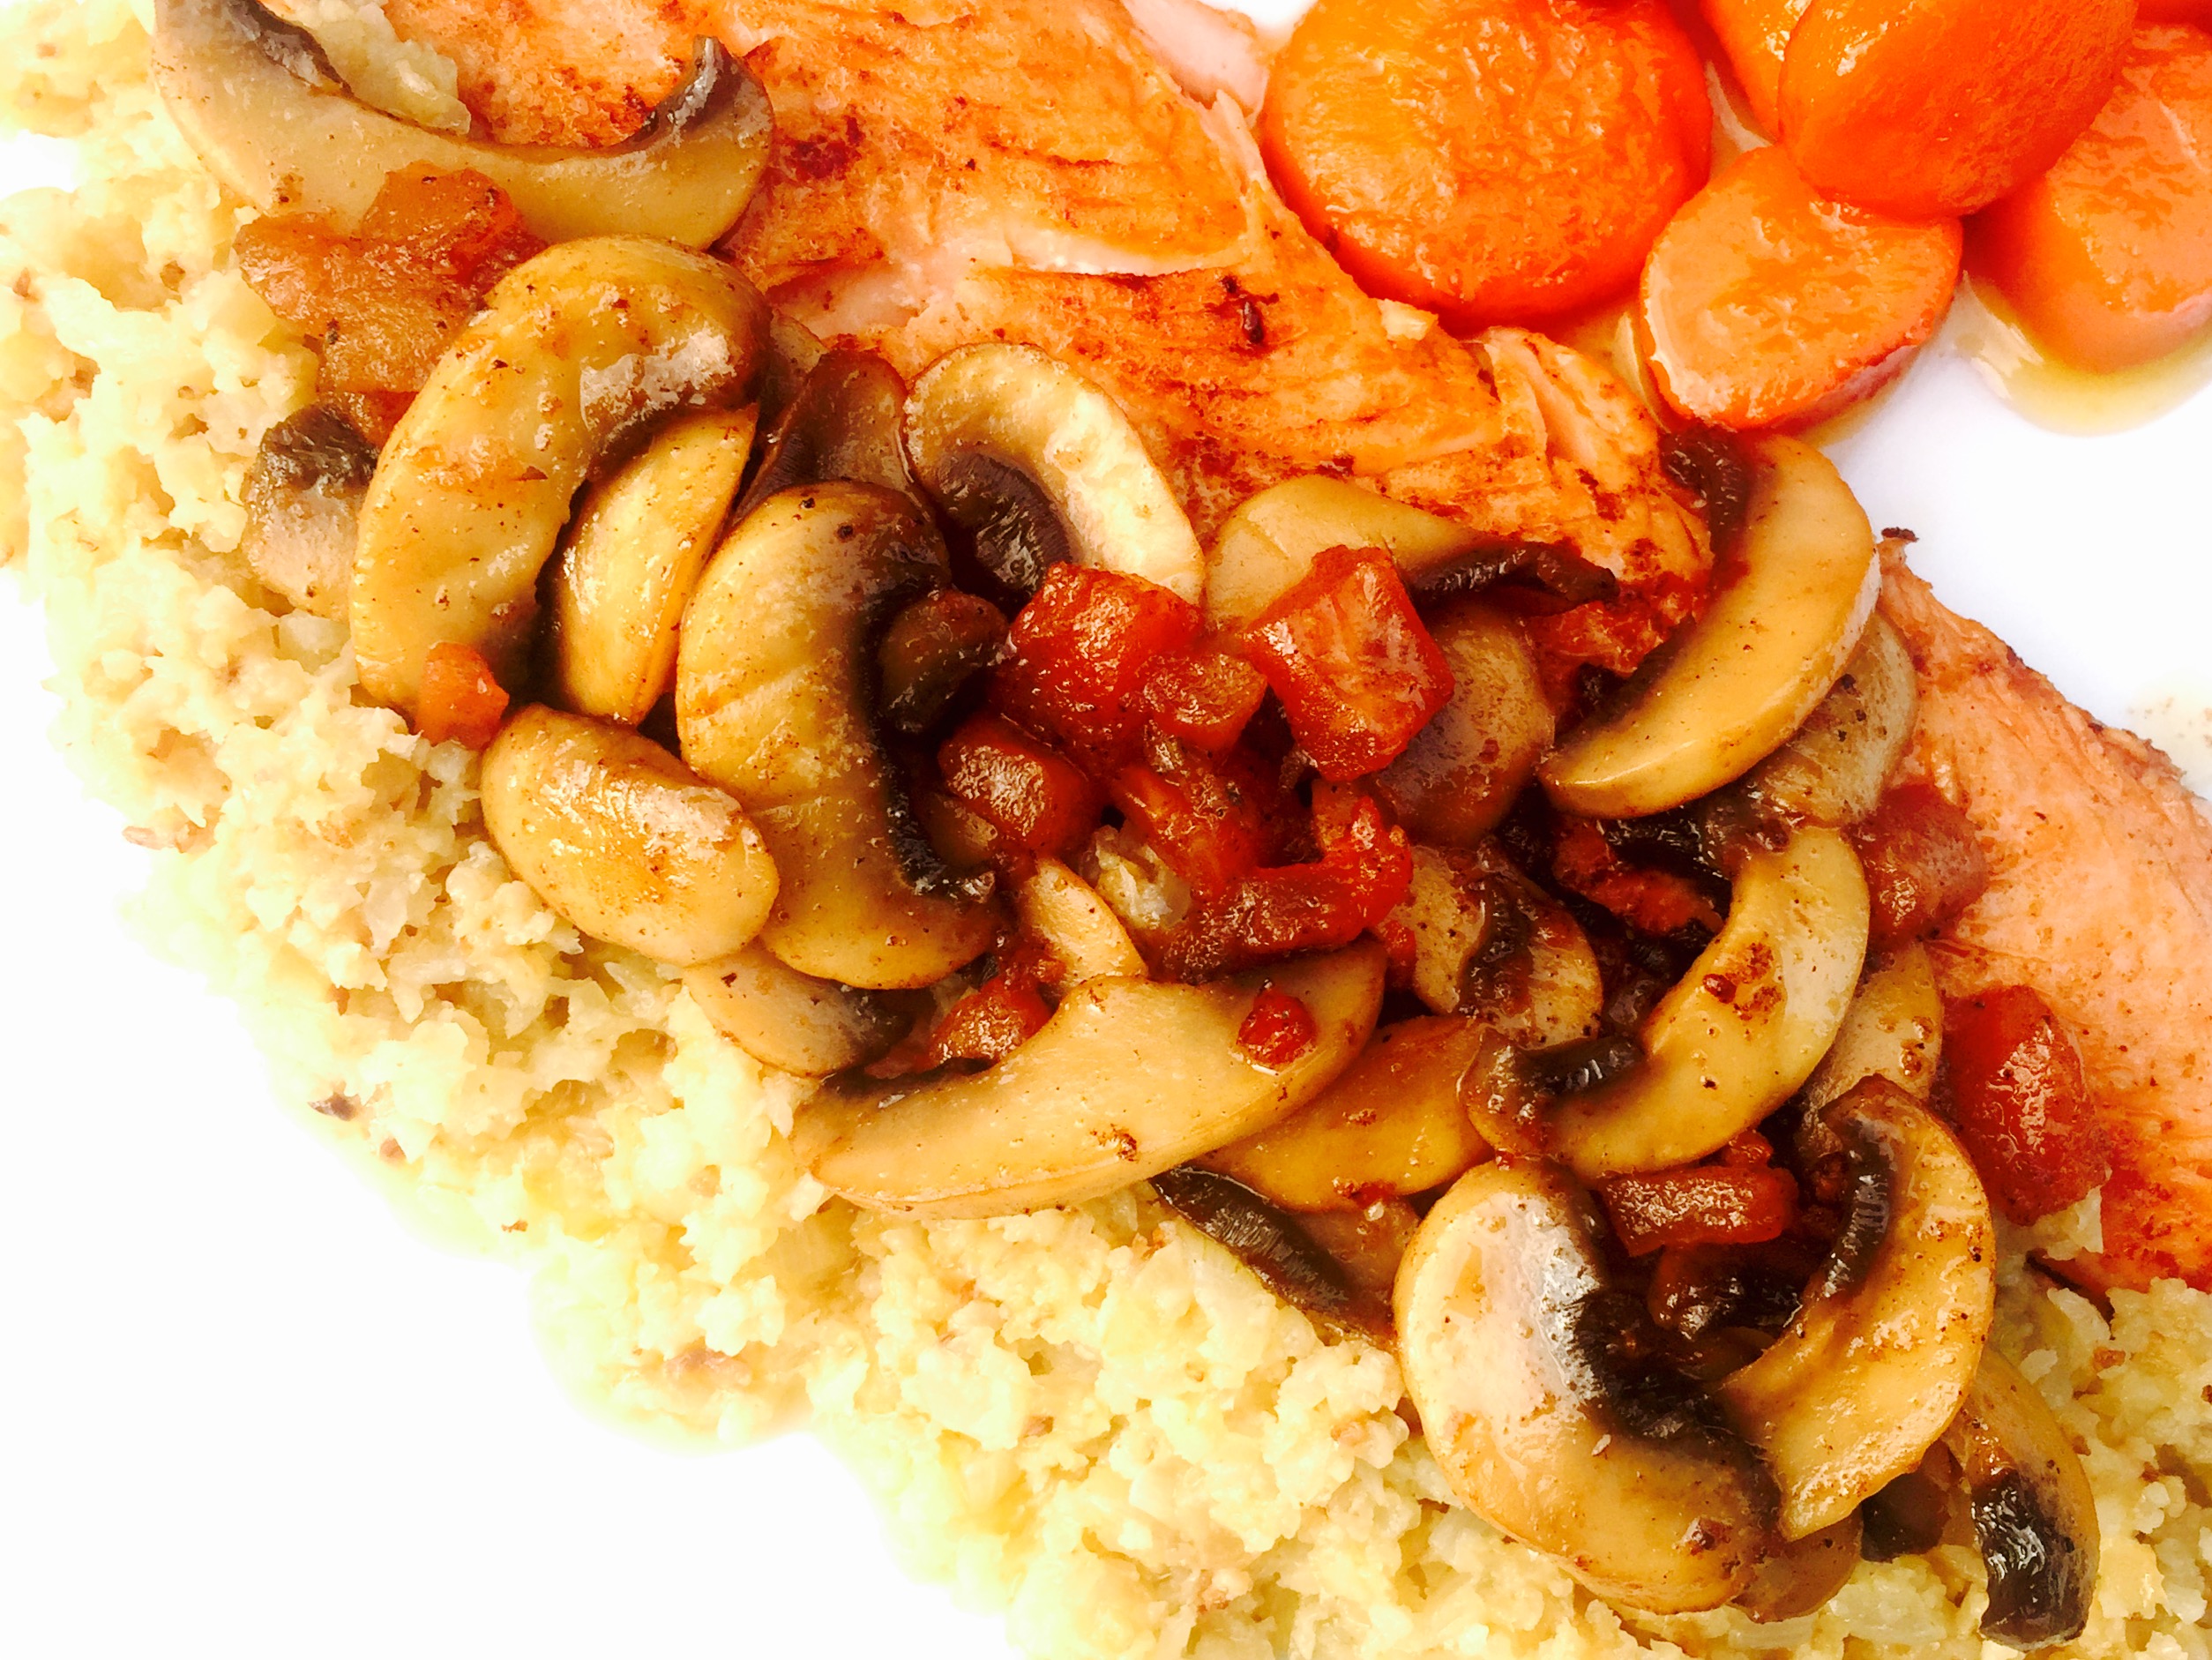 Delicious pan fried trout smothered in mushrooms and onions with maple-glazed carrots and cauliflower rice!